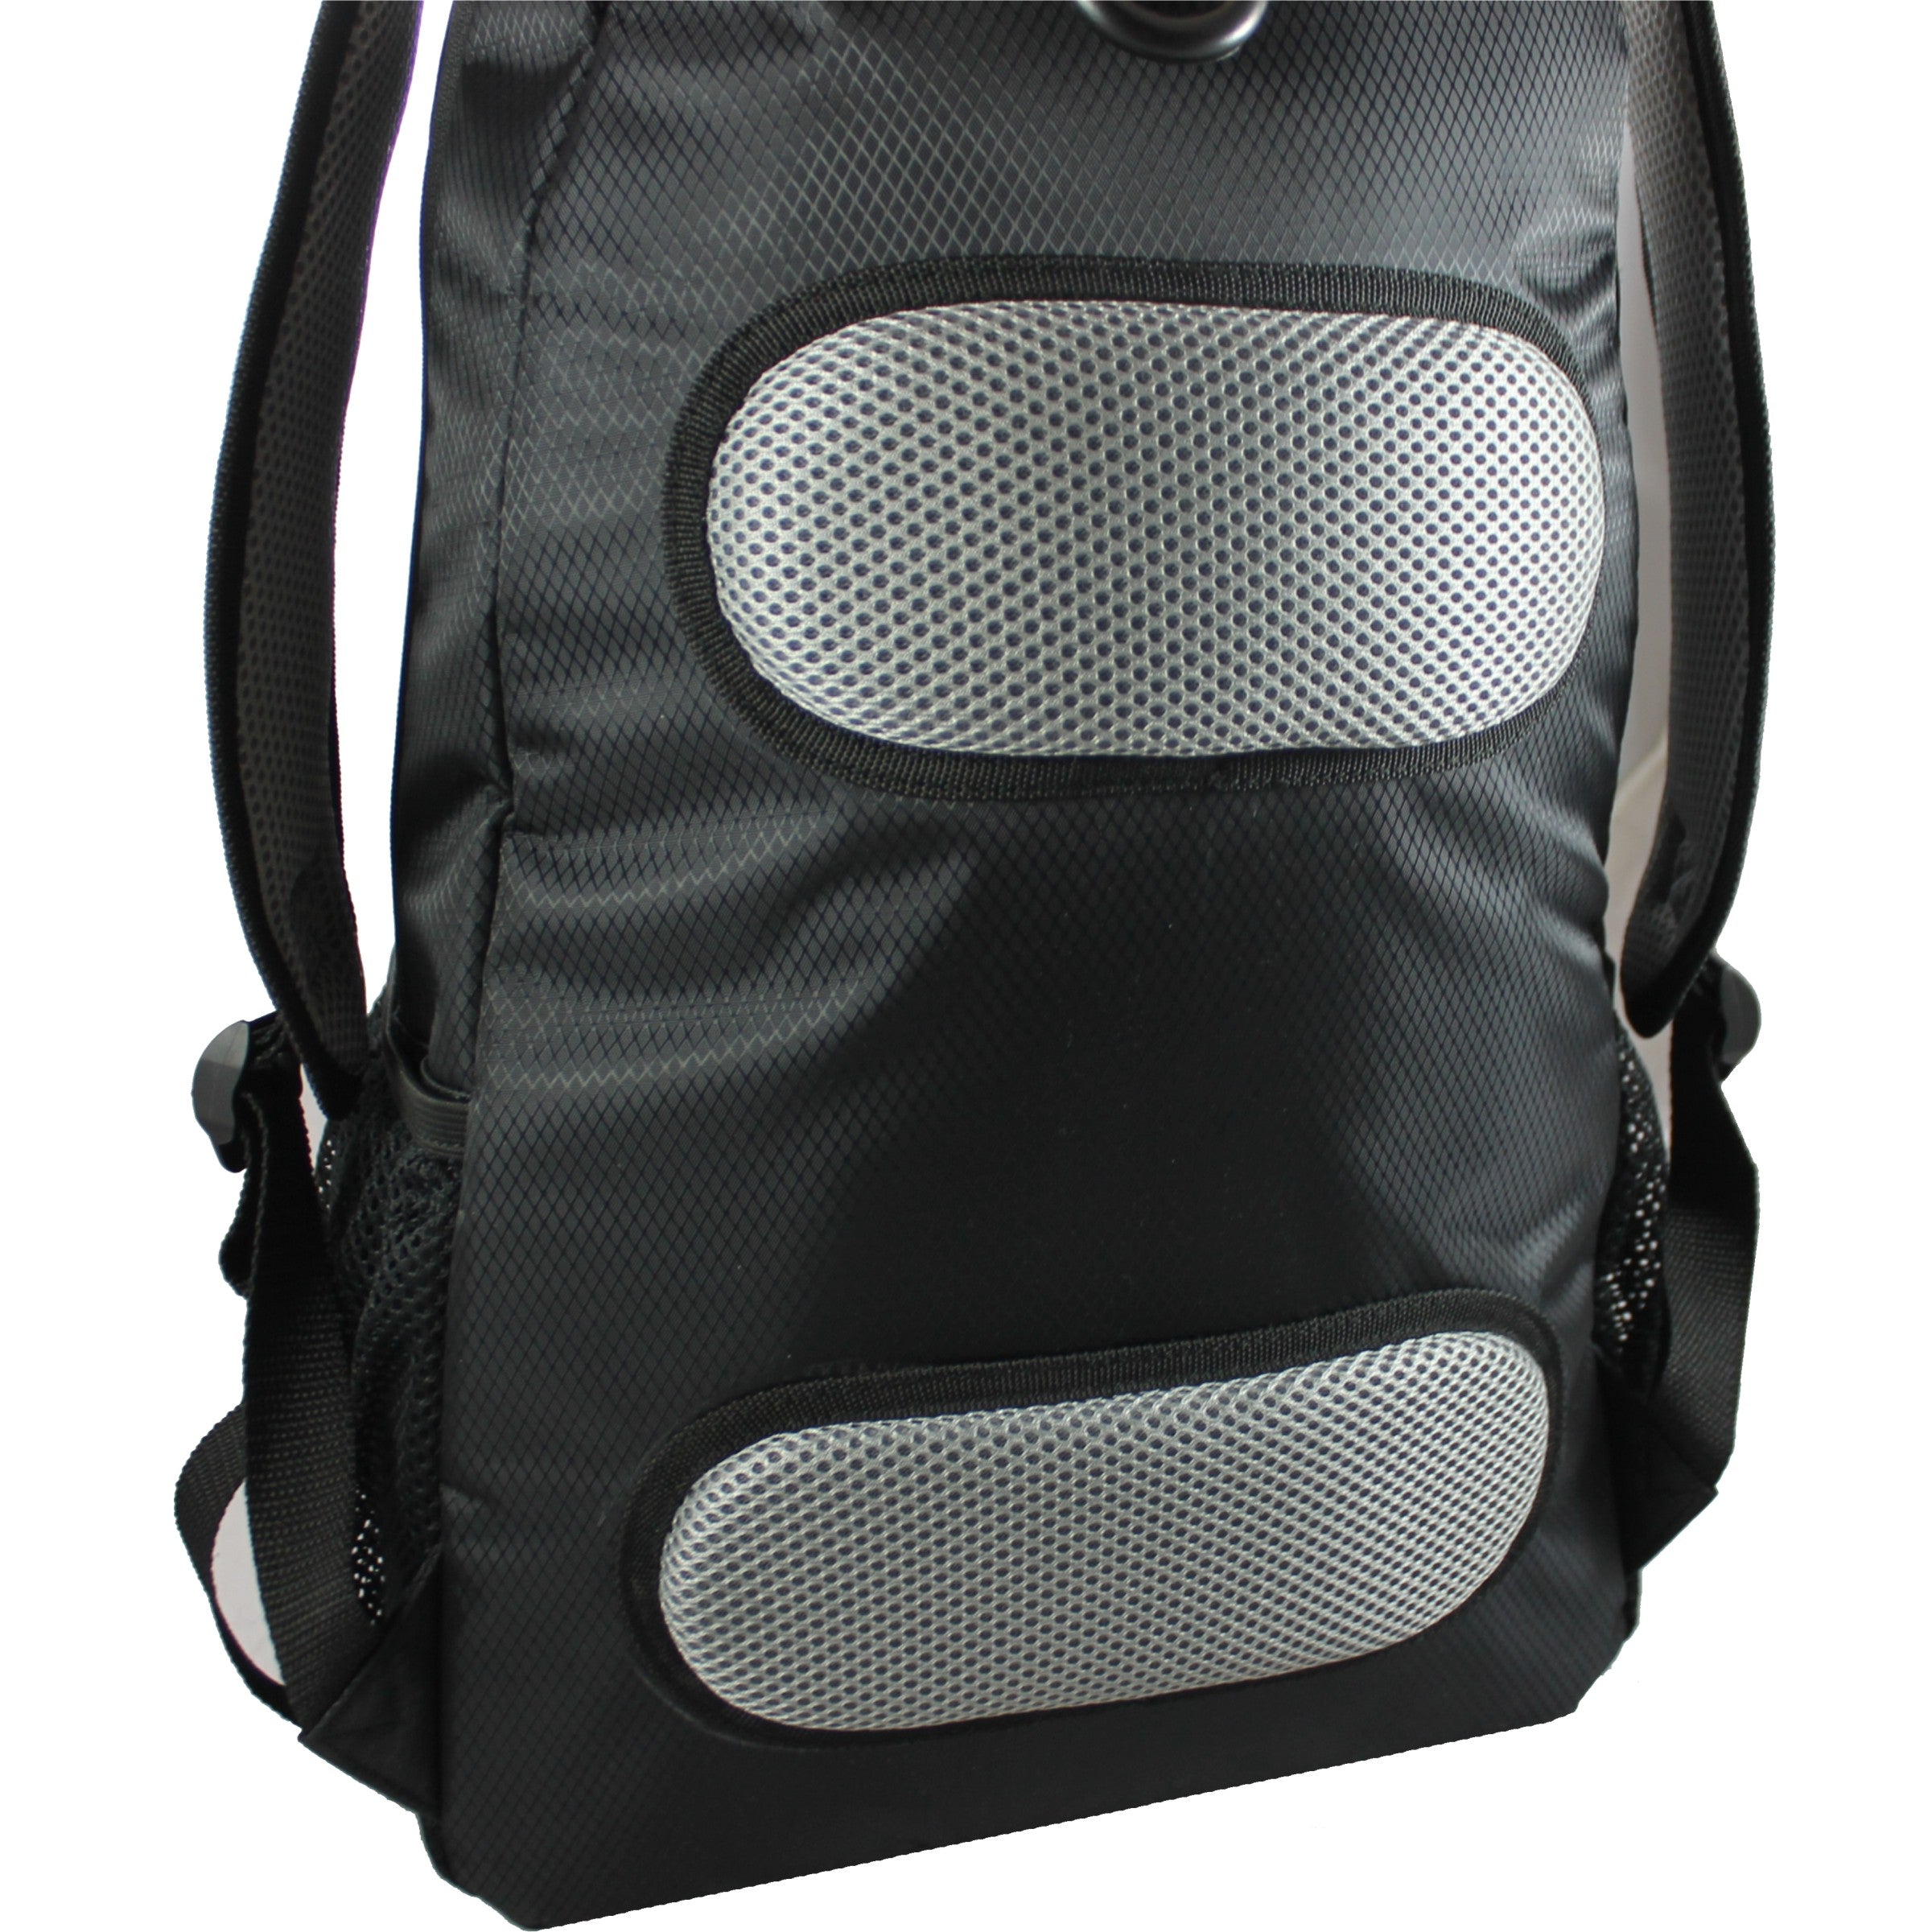 Prolite quick draw backpack in black